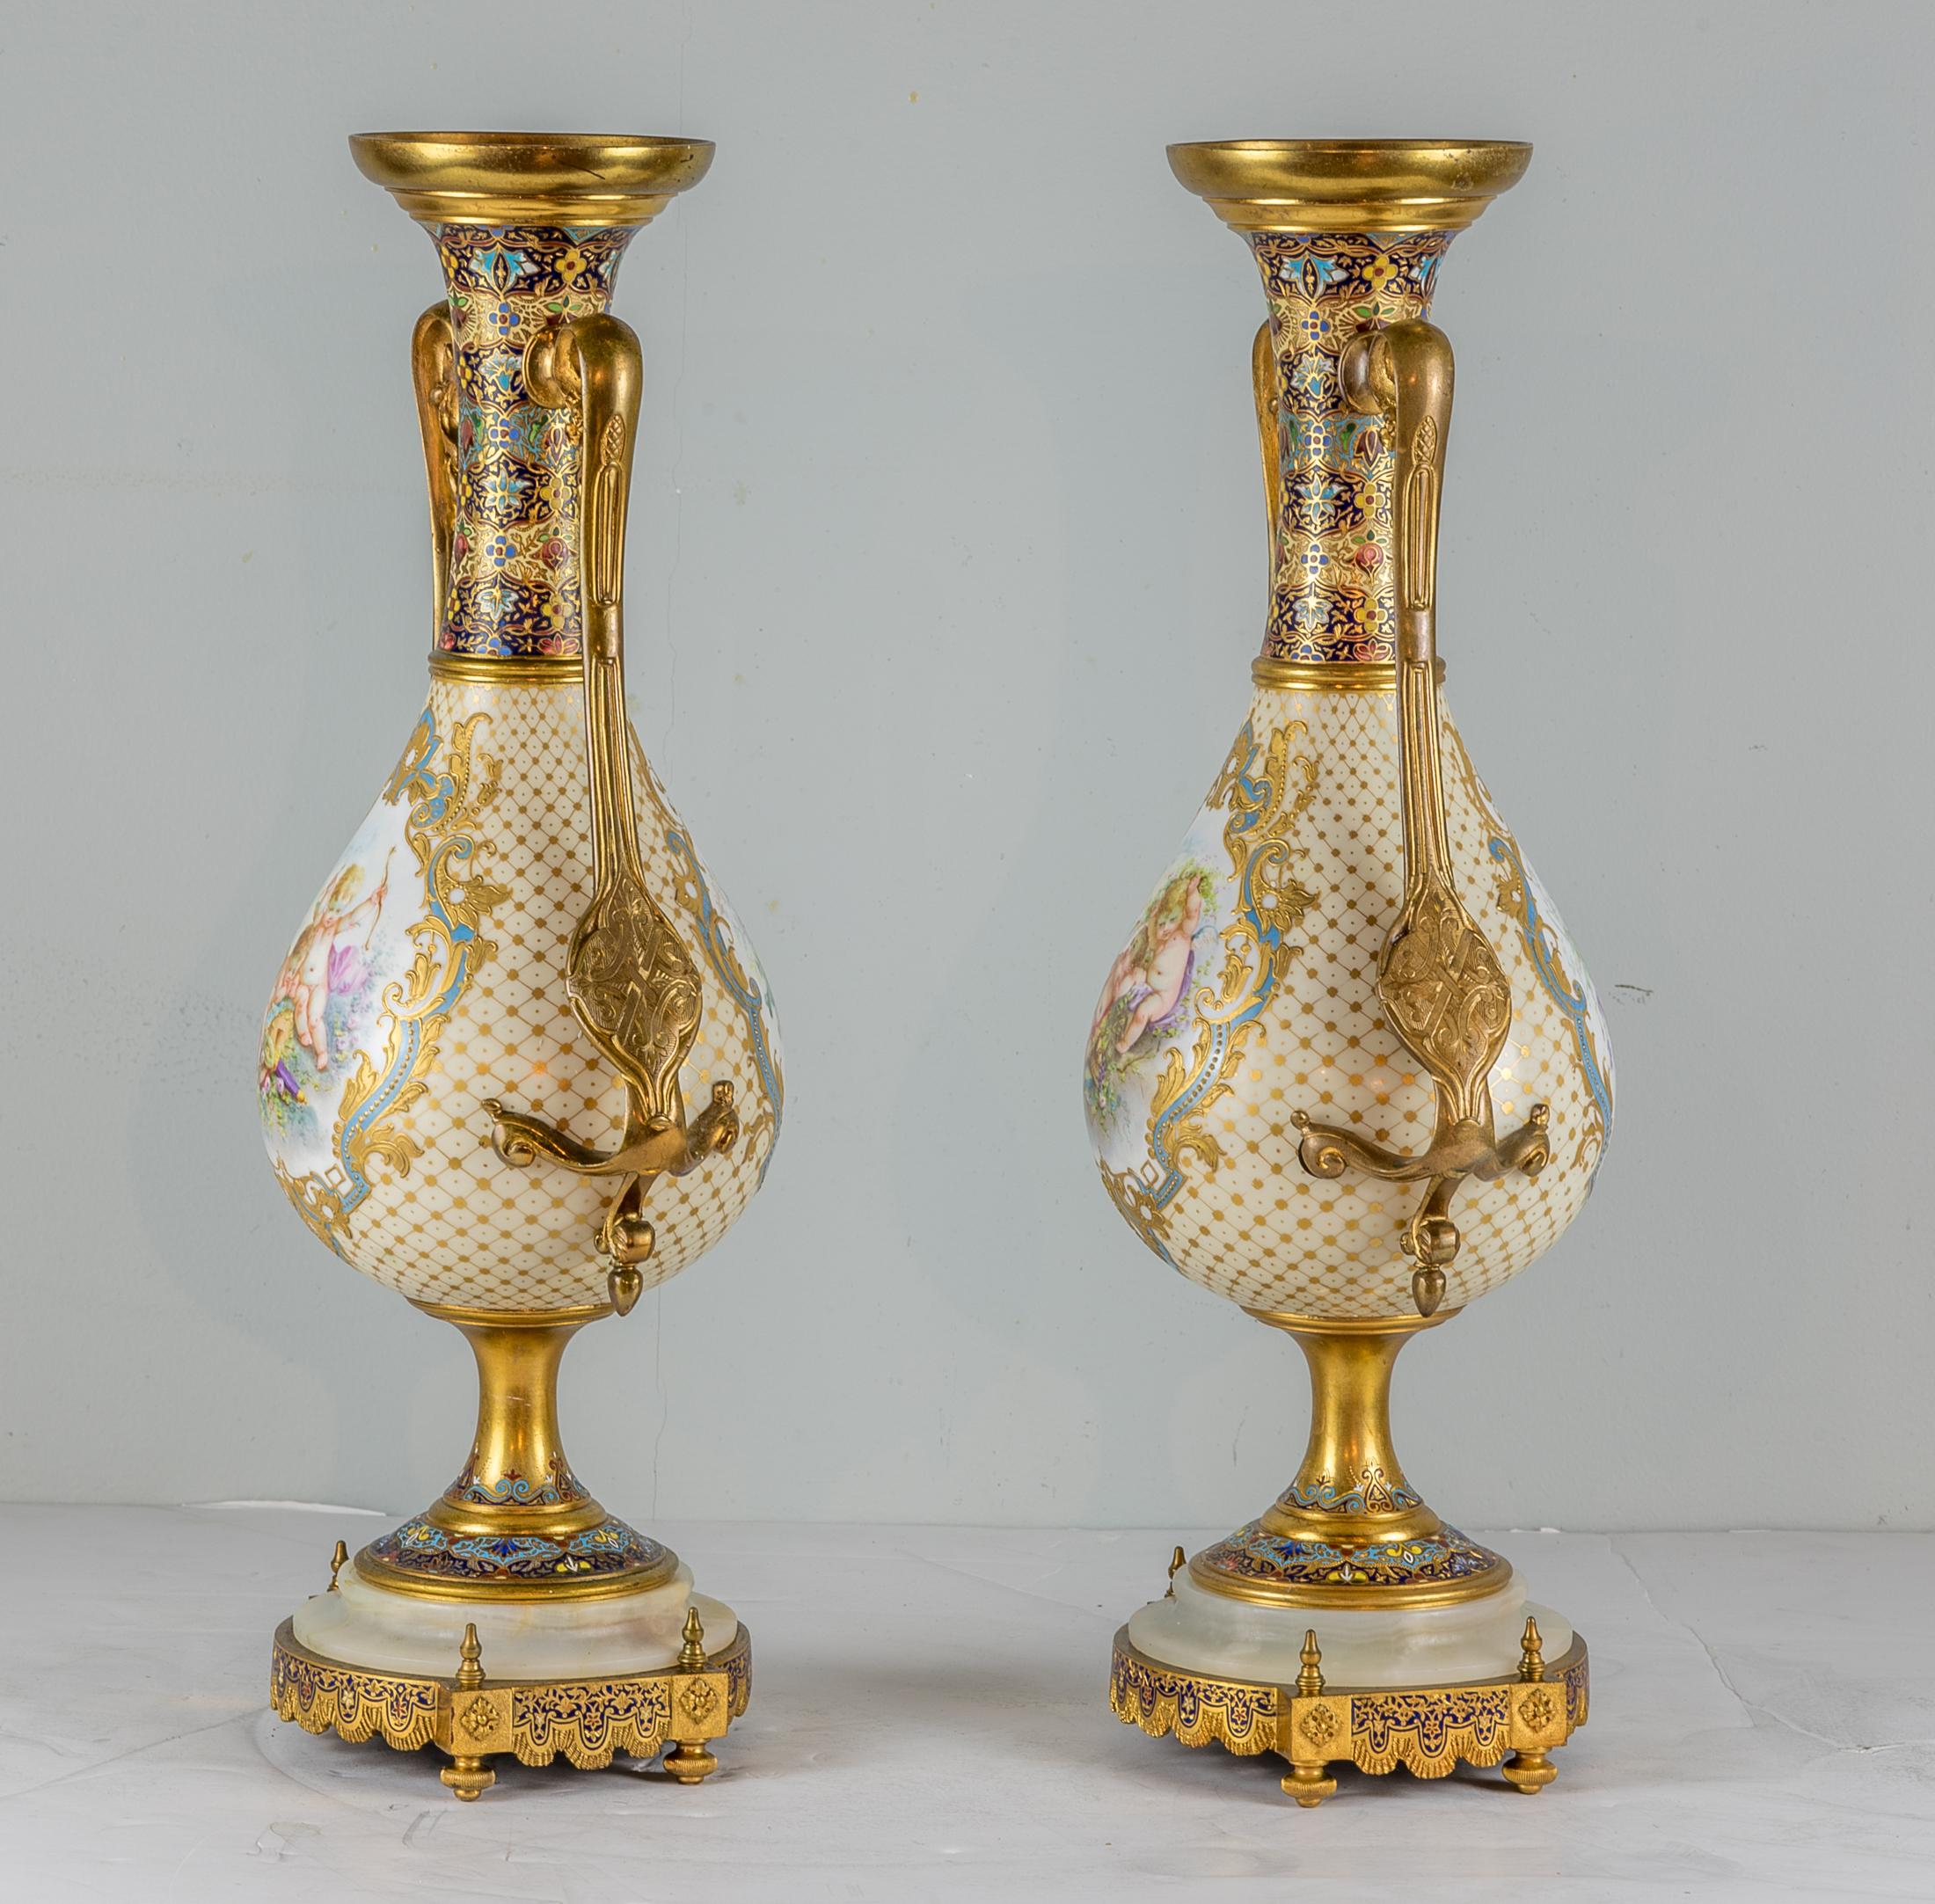 French Pair of Bronze-Mounted Sèvres Style Champlevé Enamel Vases For Sale